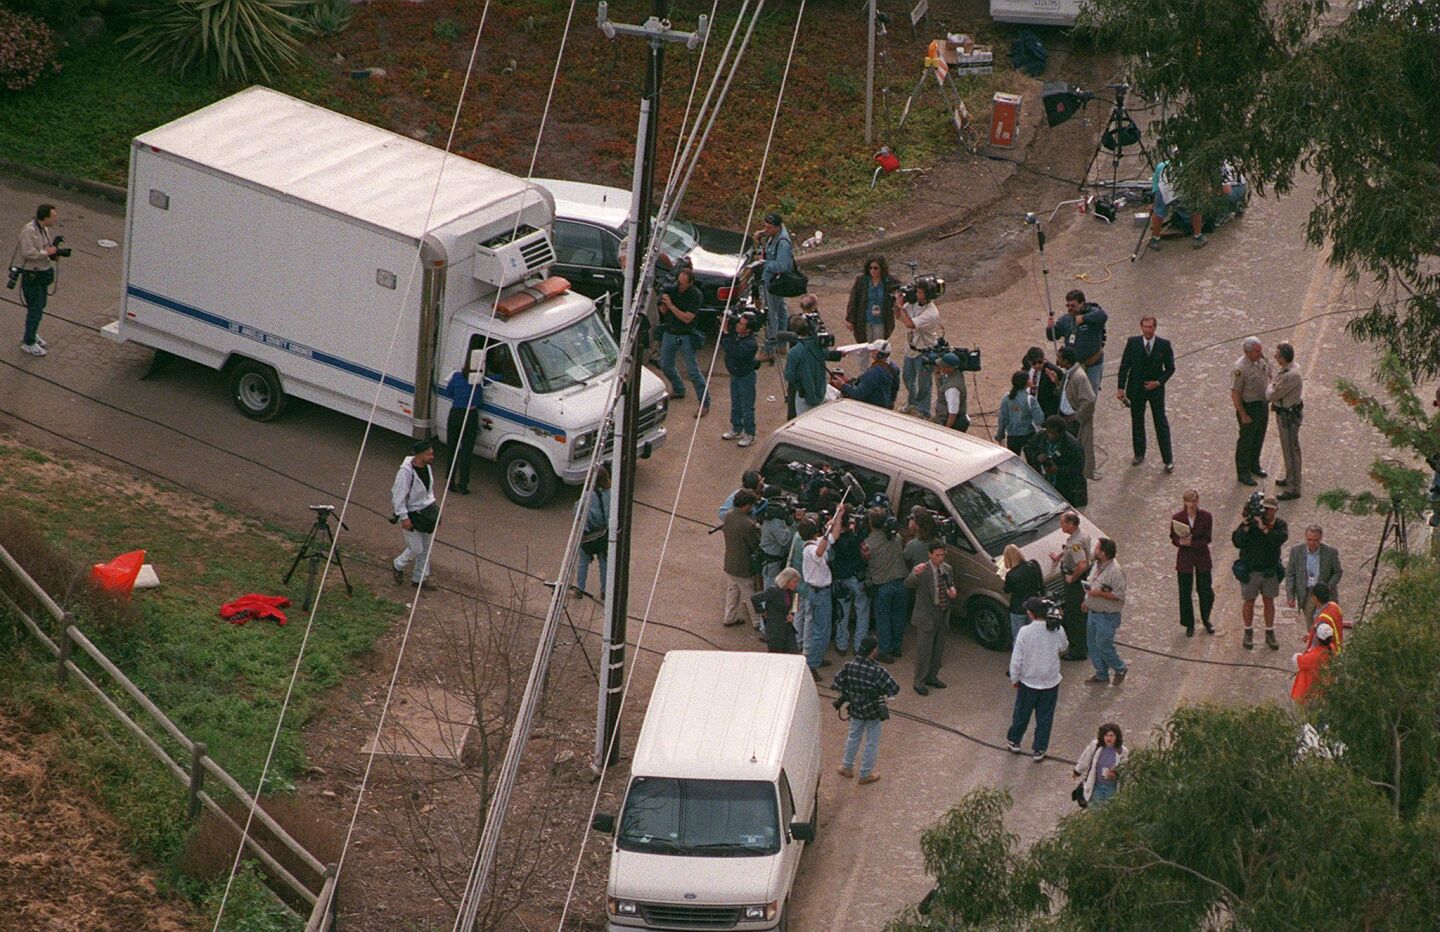 County medical examiner personnel leave after removing some of the 39 bodies of Heaven's Gate members found inside a Rancho Santa Fe mansion on March 26, 1997.